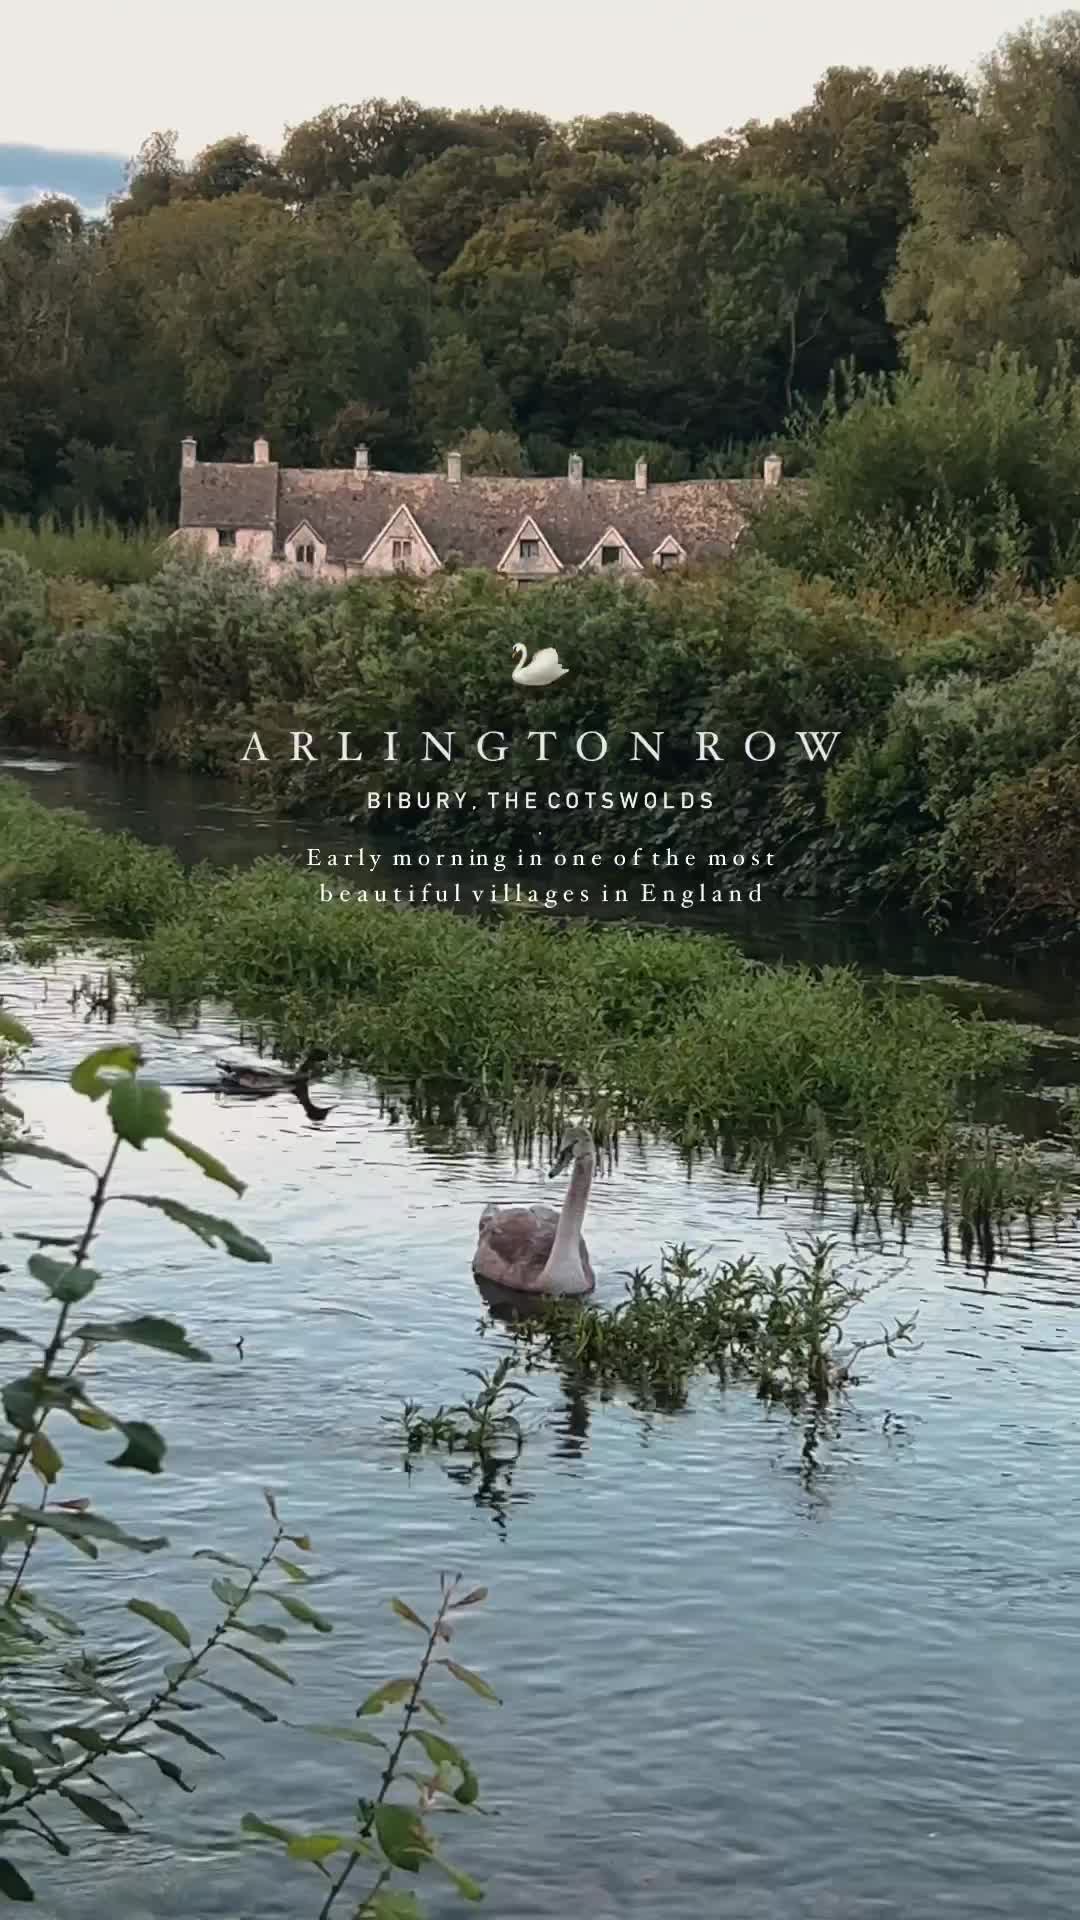 Discover Arlington Row: Most Photographed Spot in Cotswolds